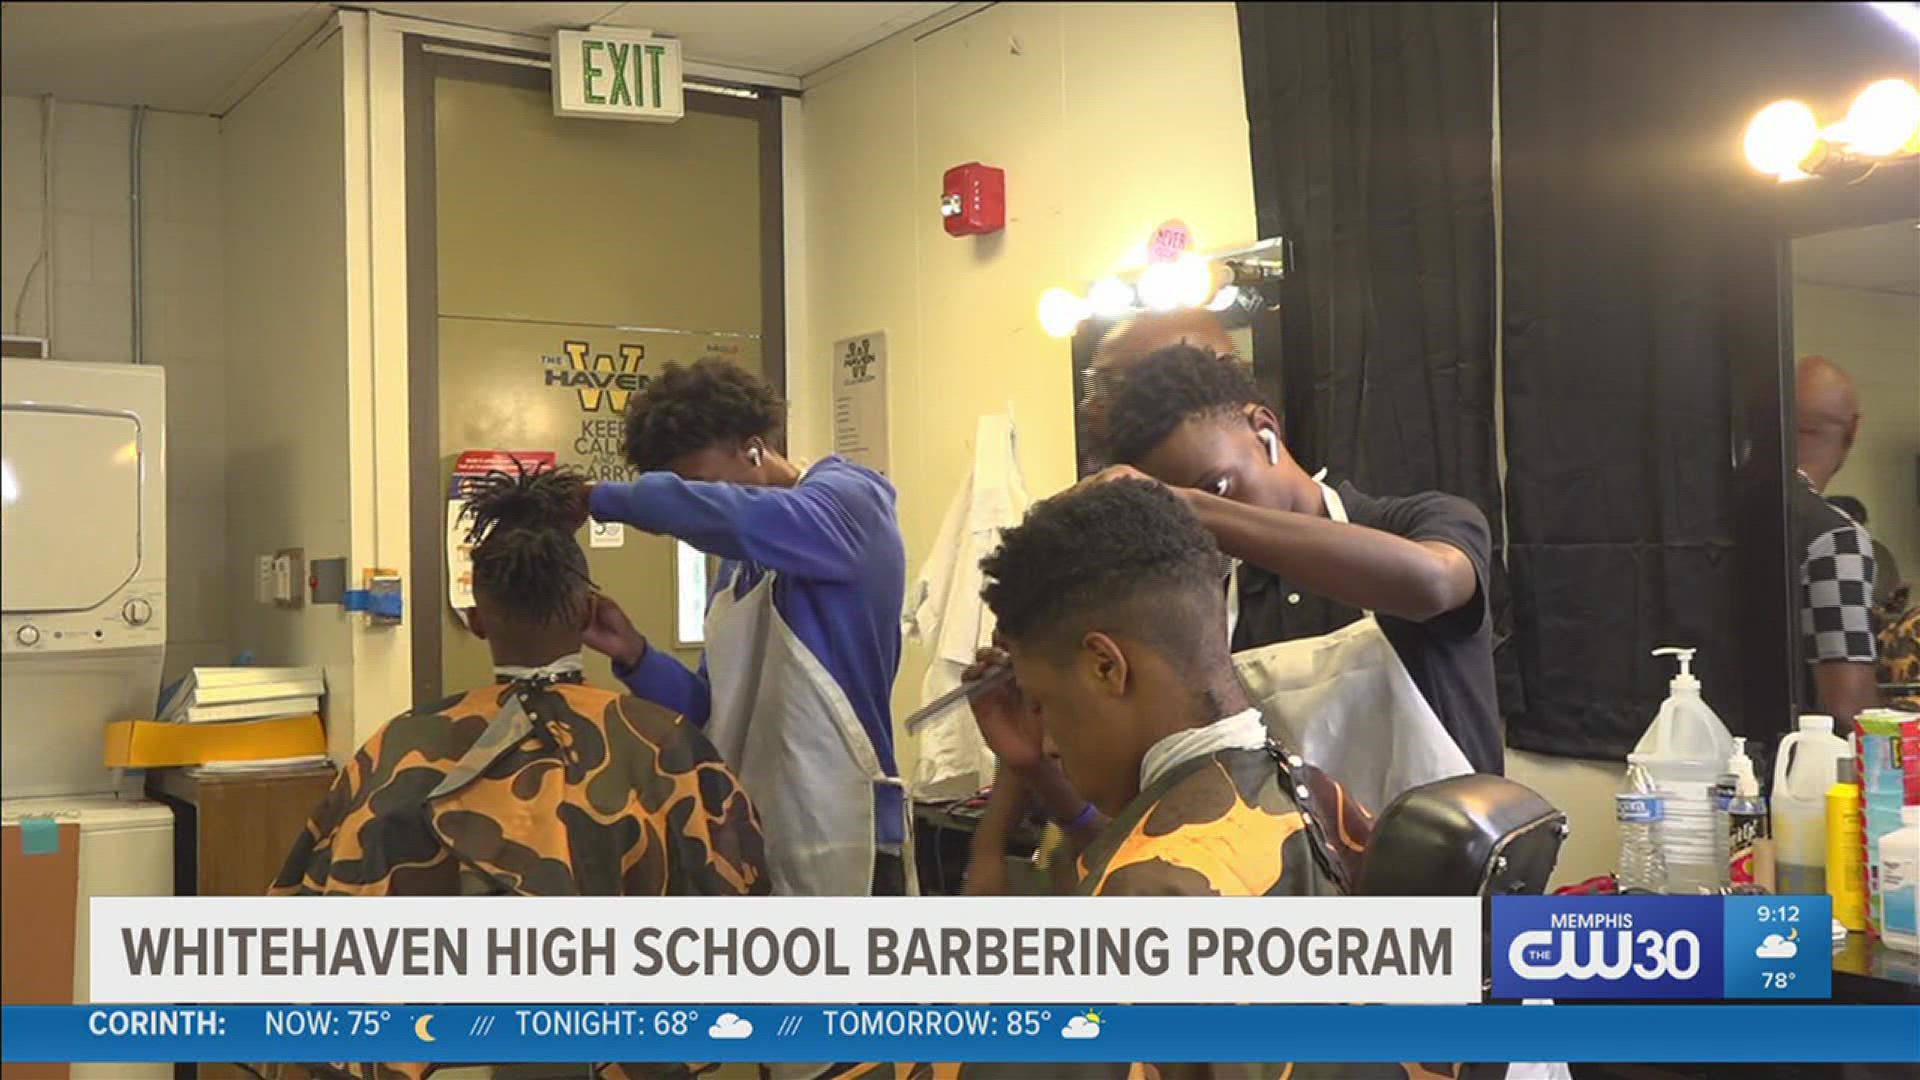 Students are offering free haircuts Mondays and Wednesdays from 2:30-5:30 p.m. so they can practice their skills.